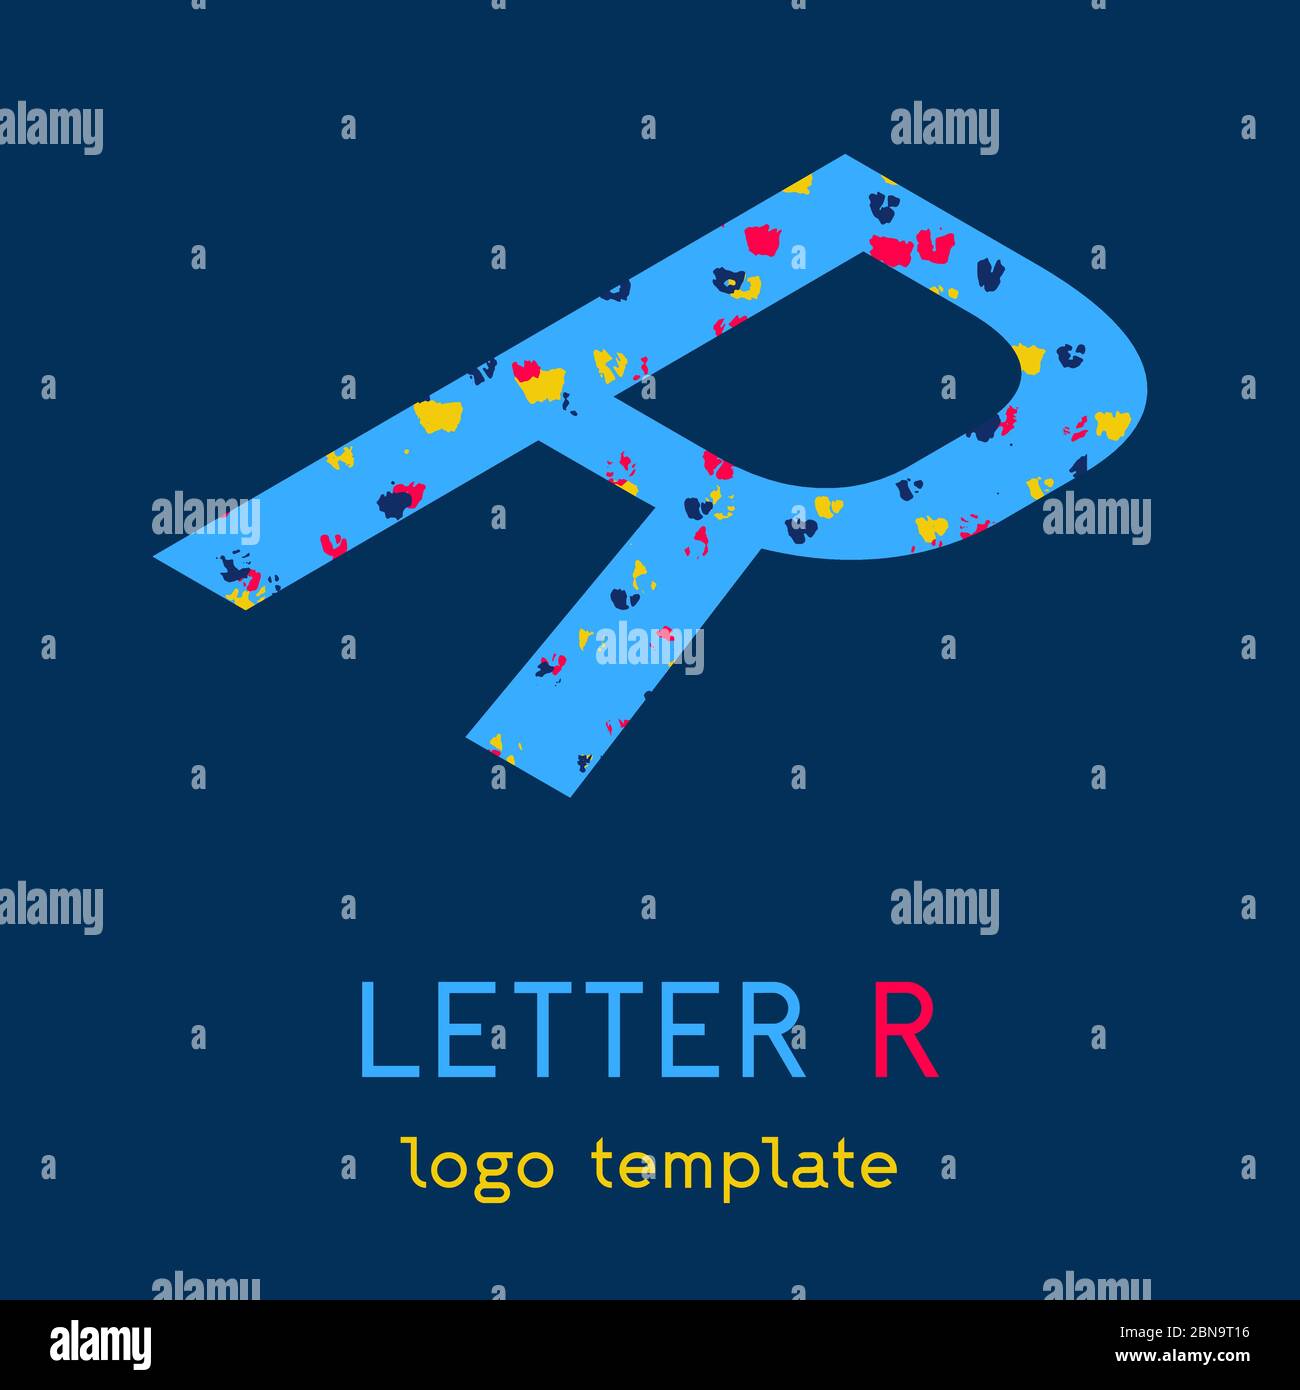 The Logo Template Using The Letter R Stock Vector Image And Art Alamy 6618